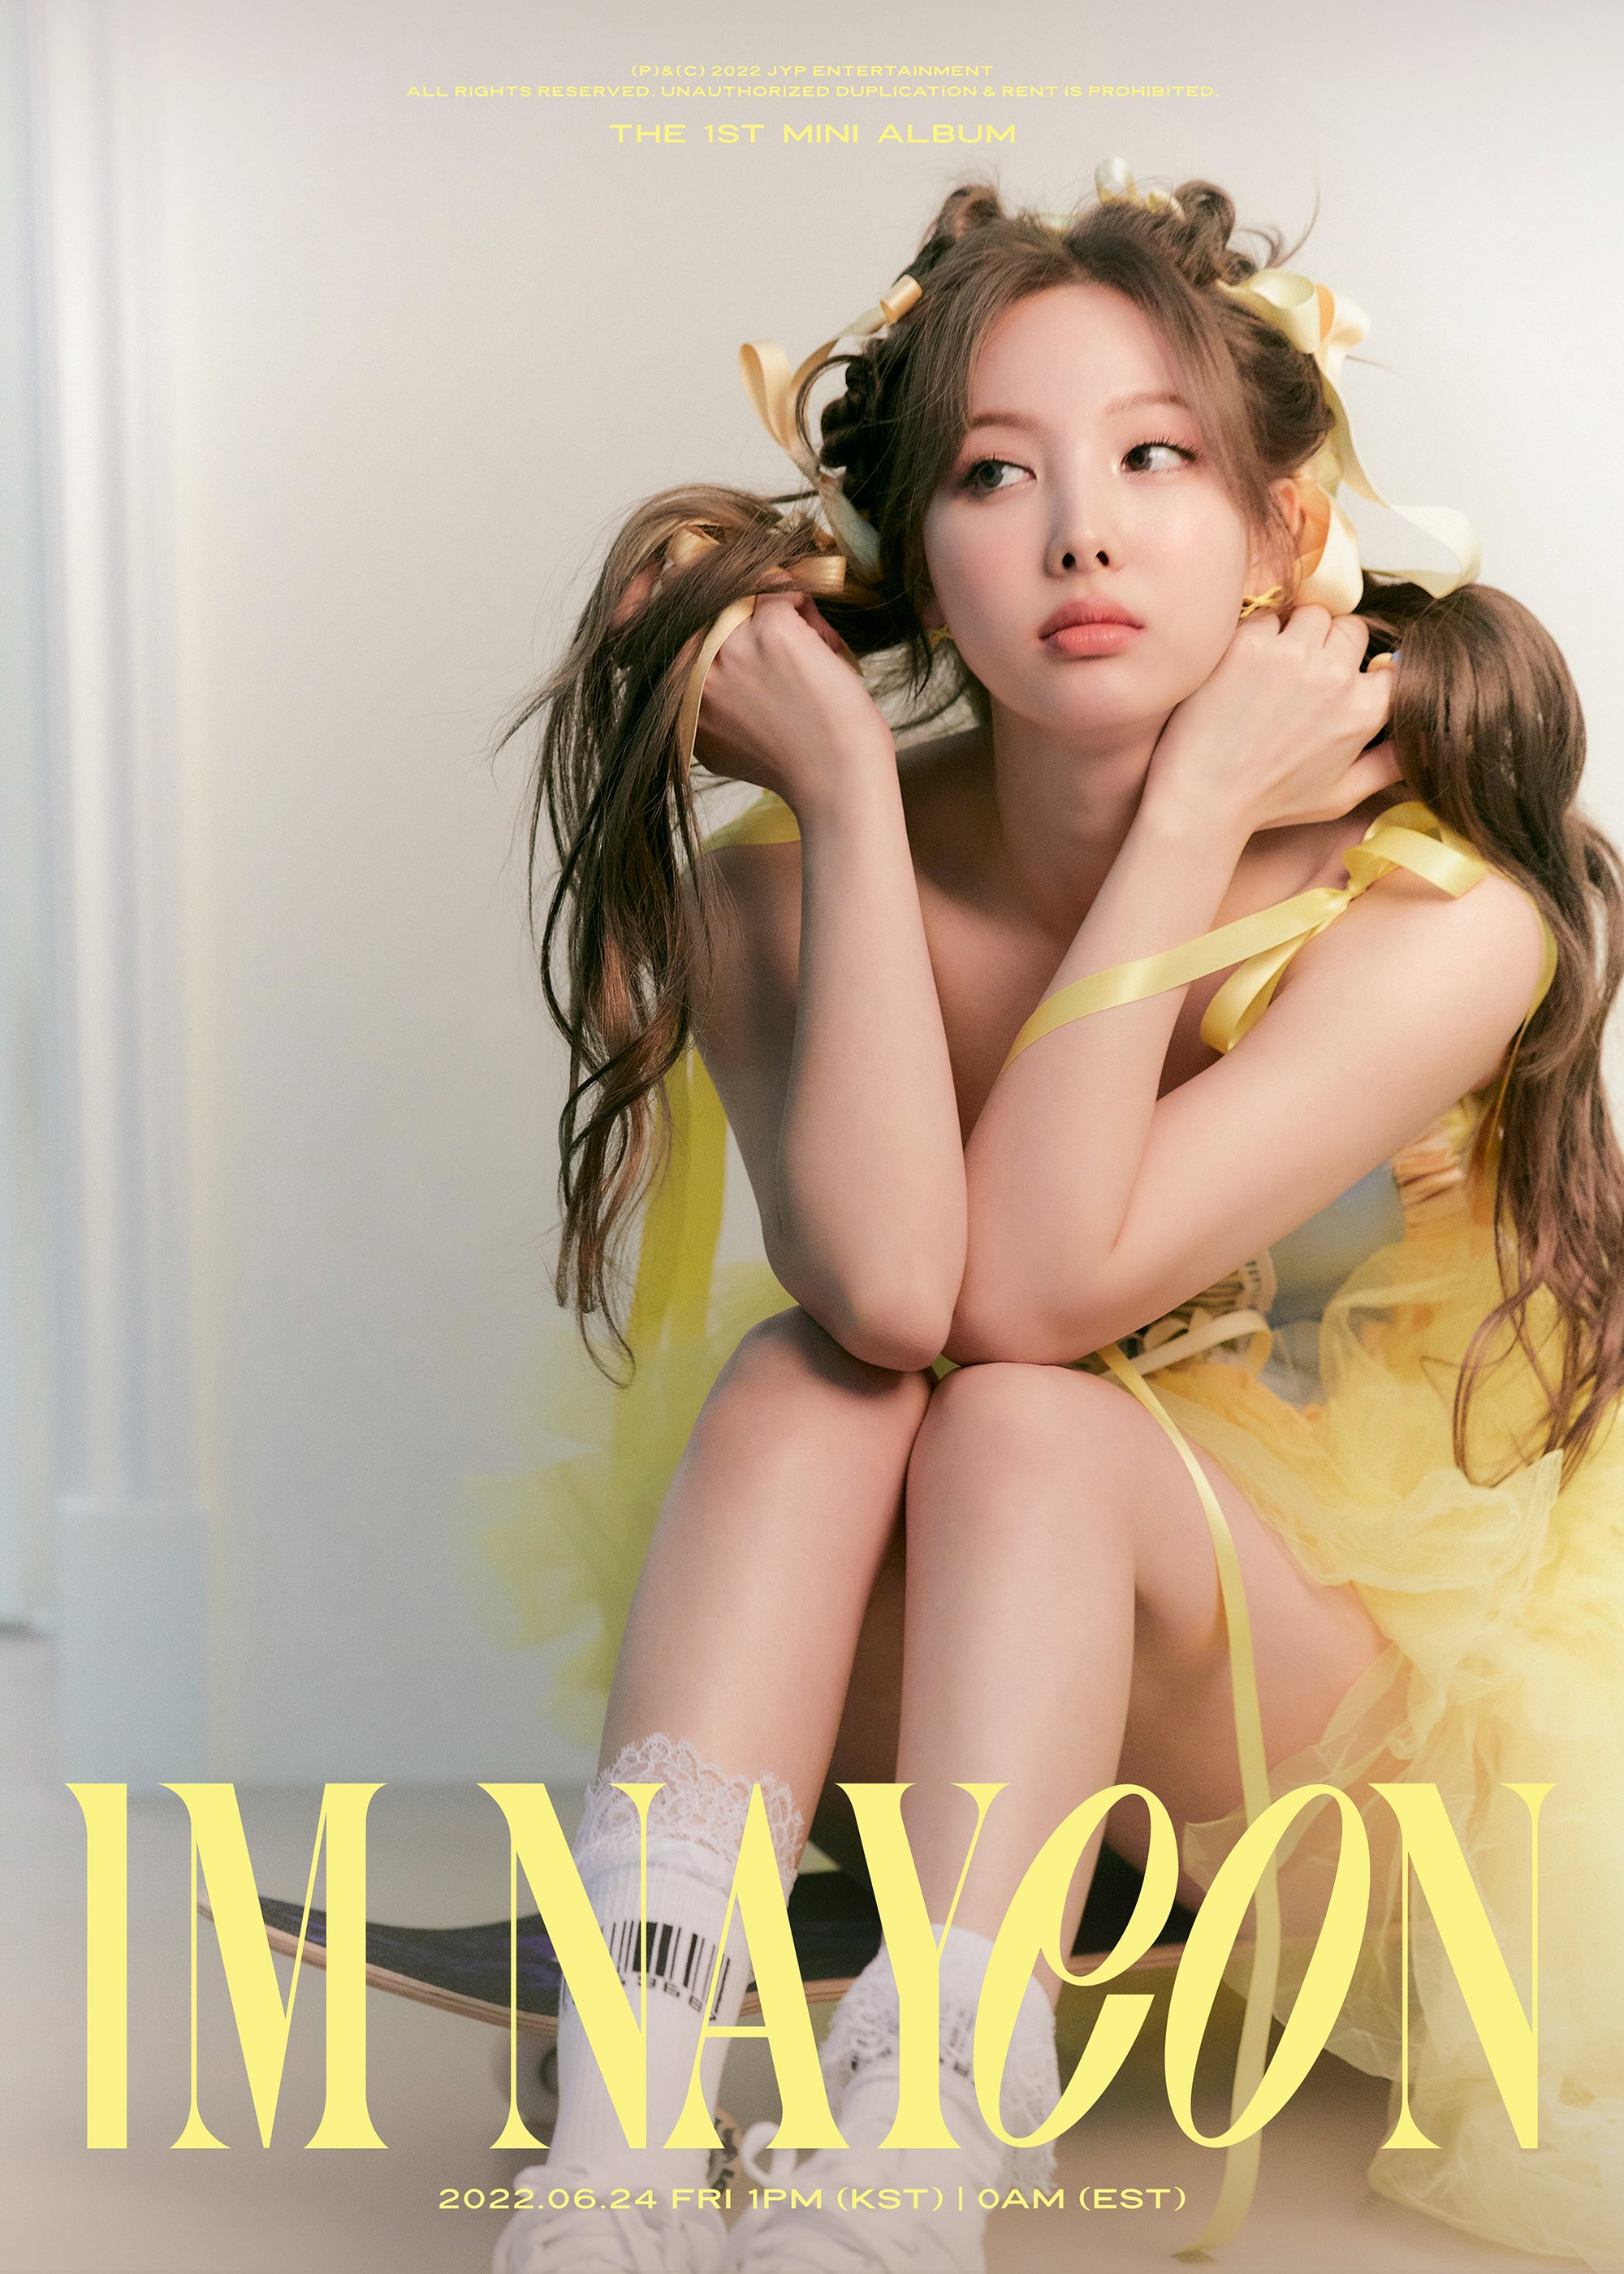 TIEDIC Kpop Nayeon Twice Concept Poster for Between 1 And 2 Talk